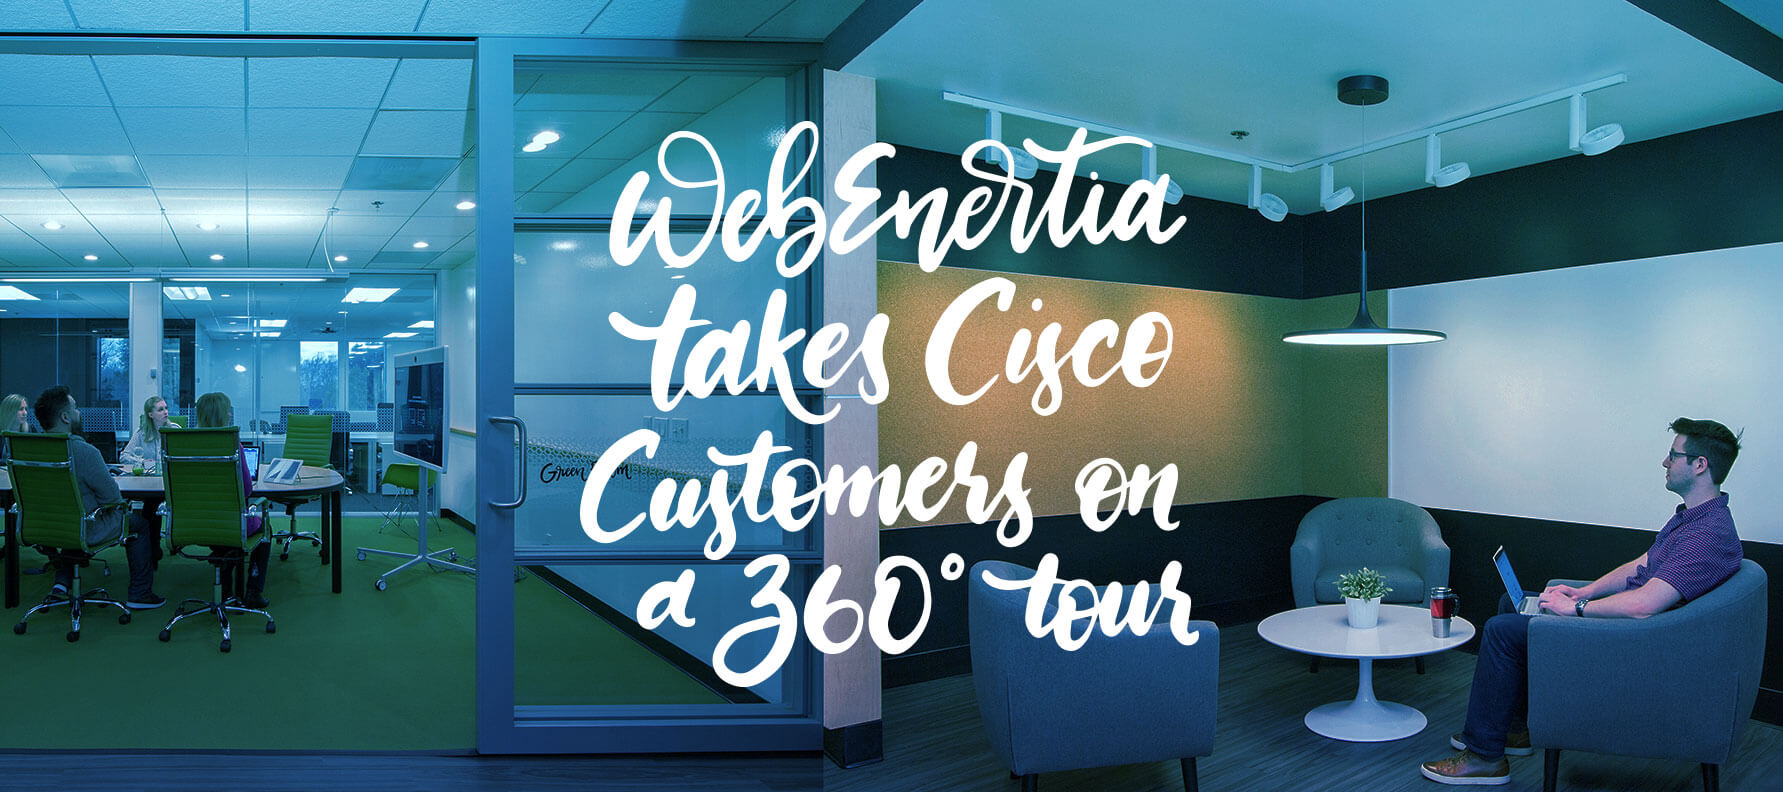 Clear Digital Takes Cisco Customers on a 360° Tour